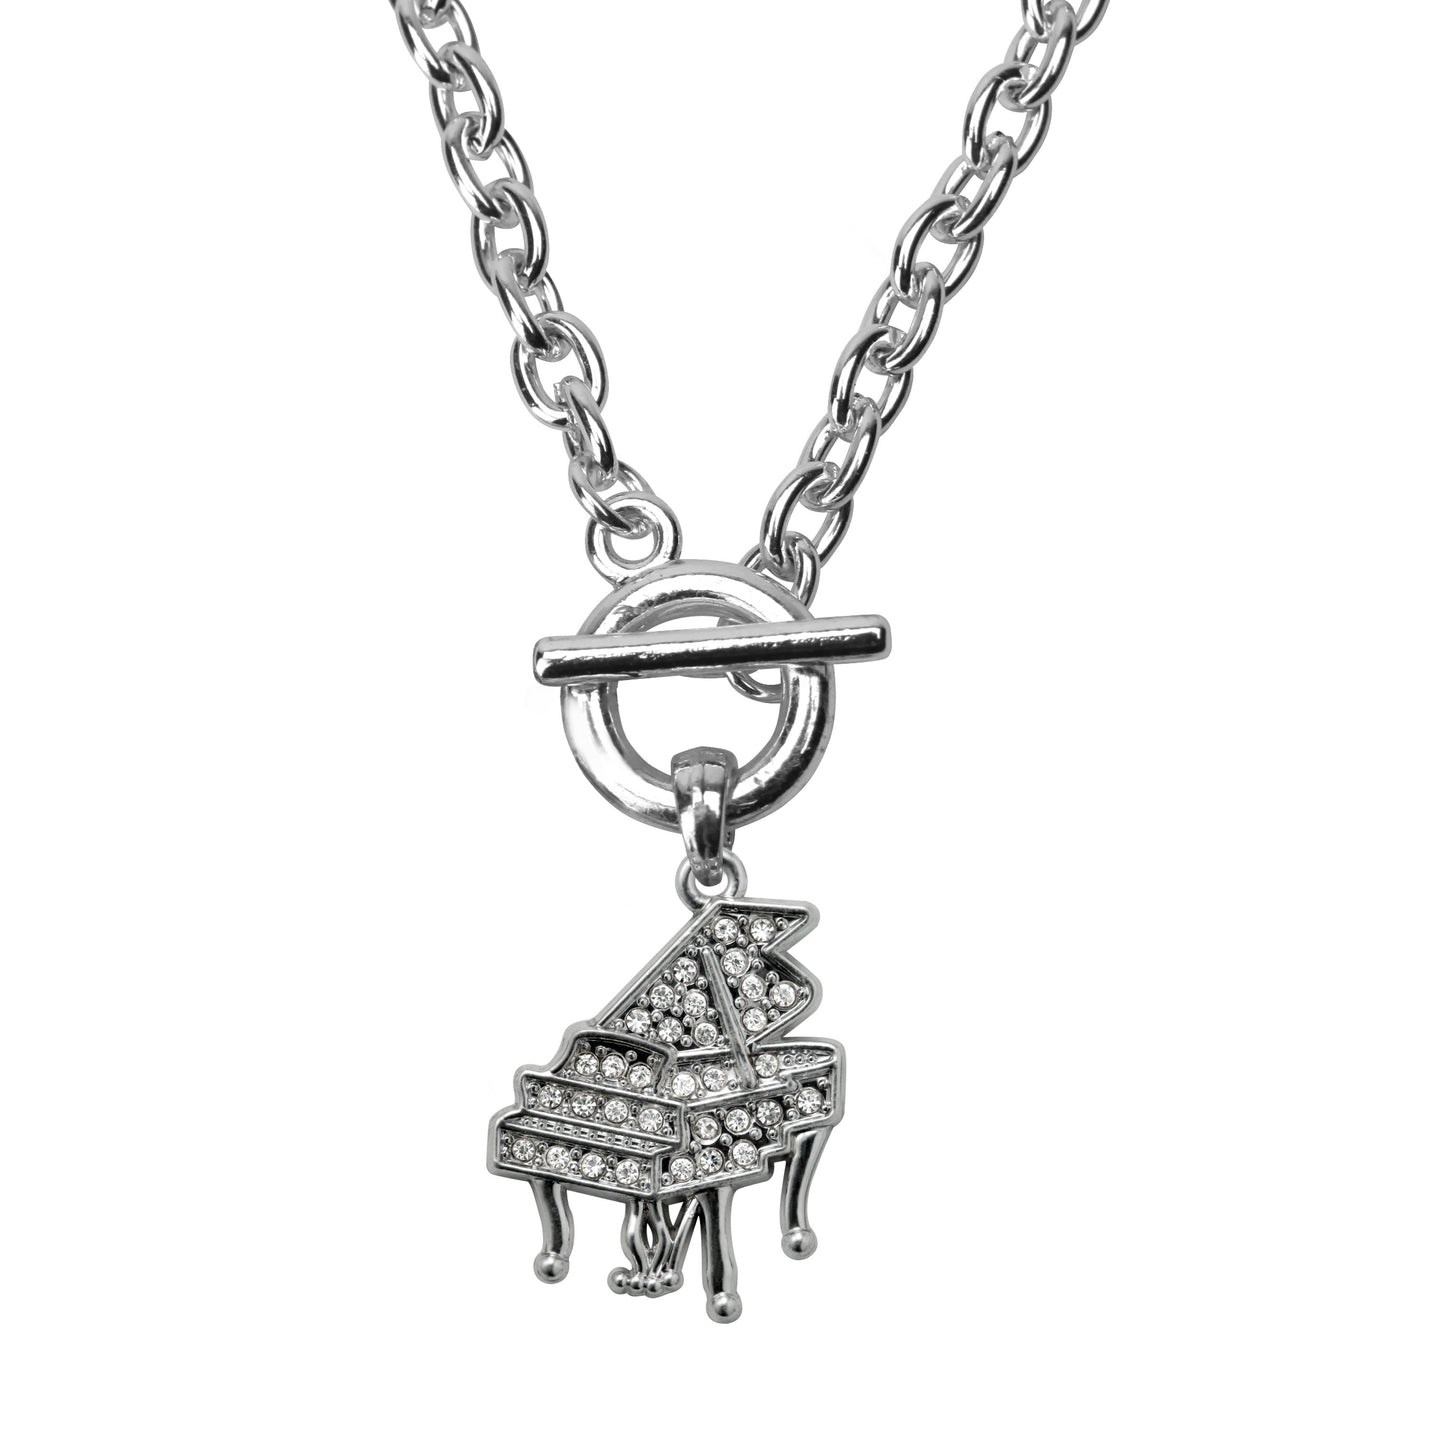 Silver Piano Charm Toggle Necklace